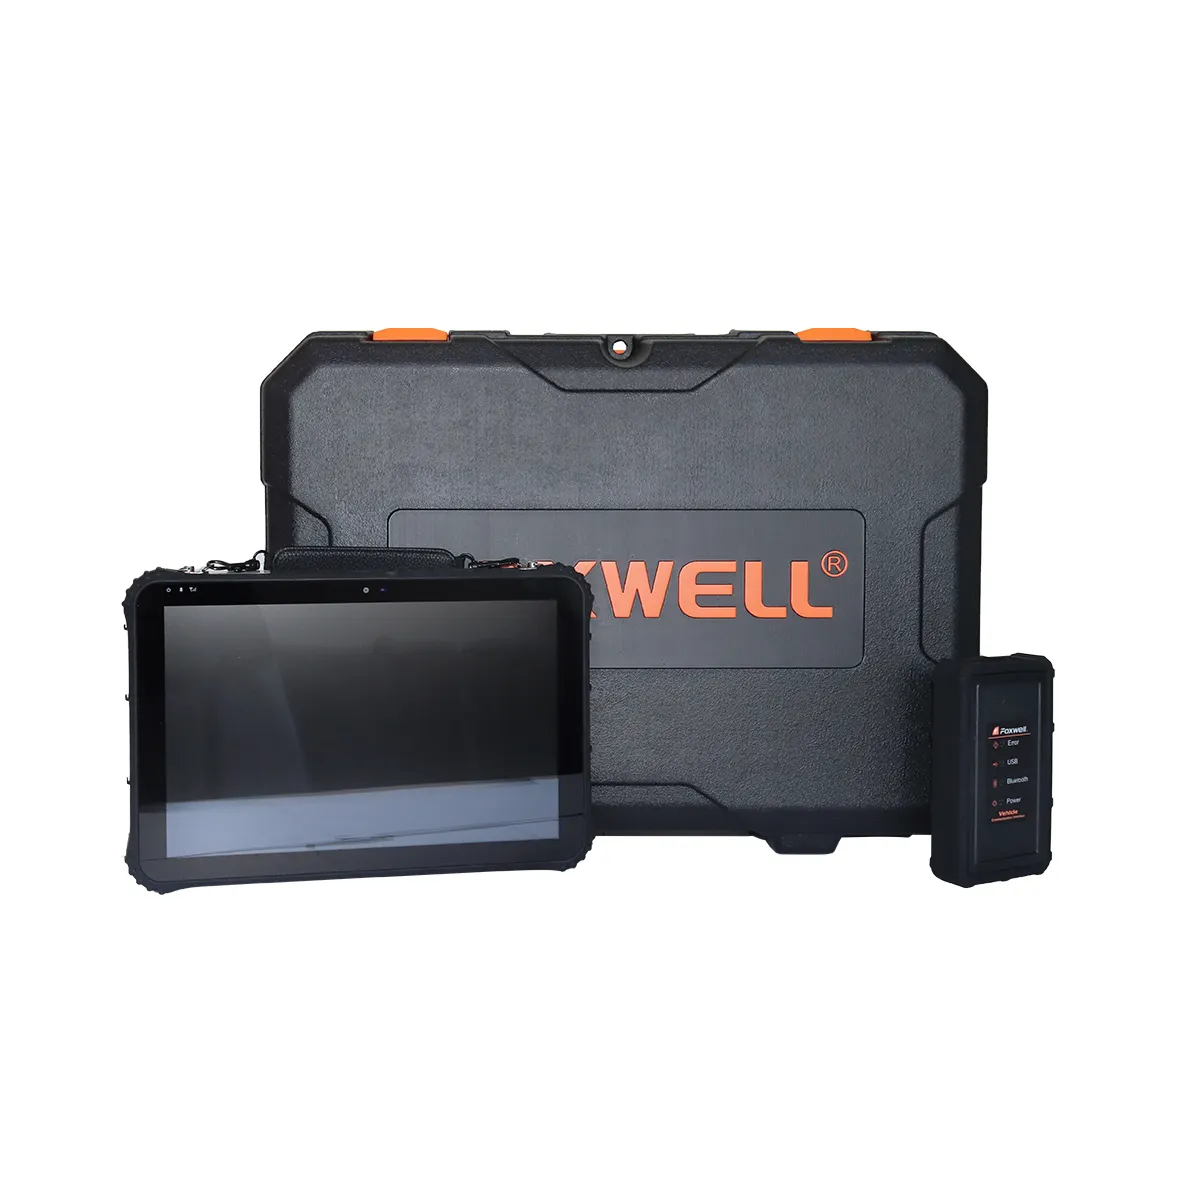 Foxwell GT90Max Newest OBD2 Car Diagnostic Scanner Windows system Equipped with 35+ Maintenance Functions All System Diagnosis